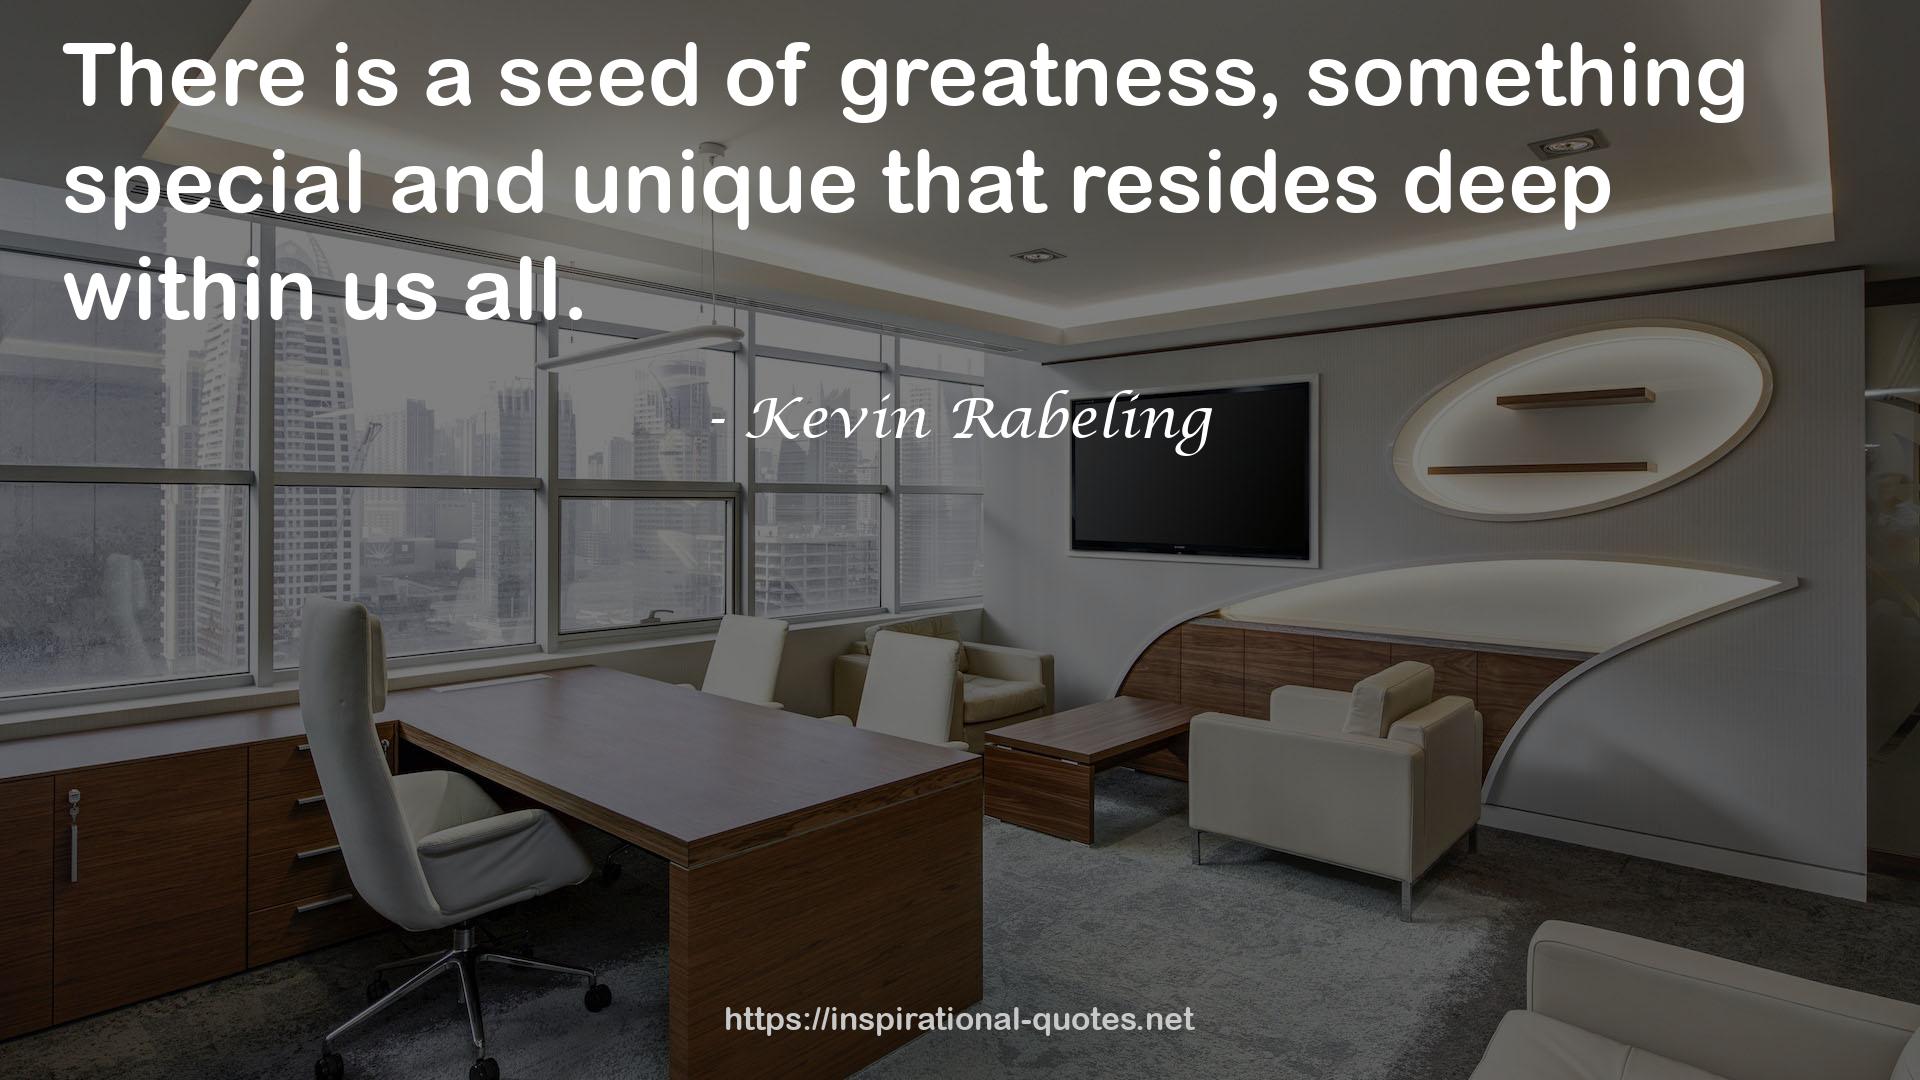 Kevin Rabeling QUOTES